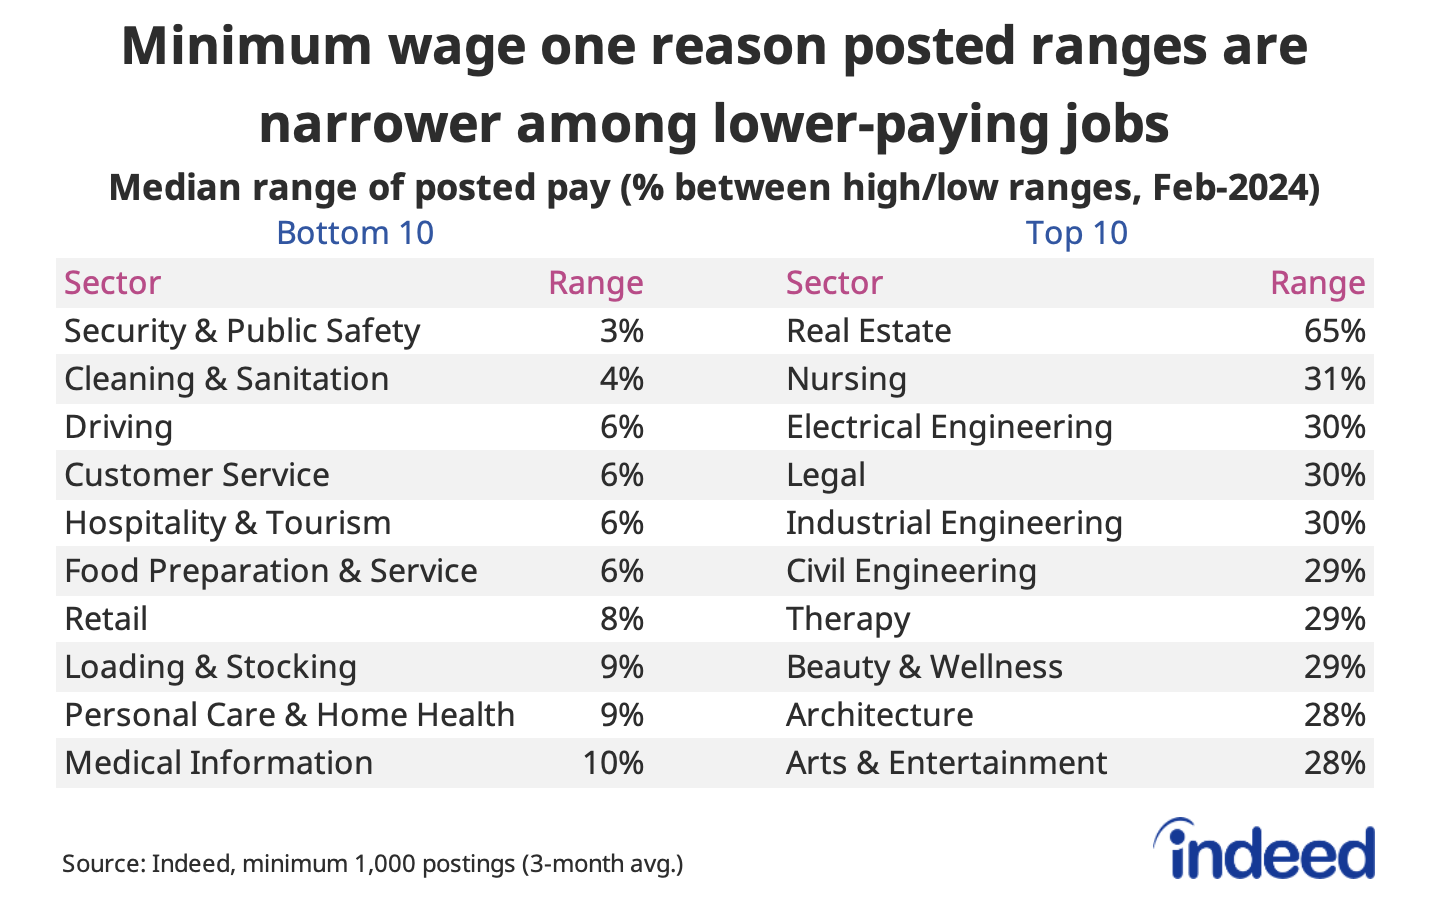 Table titled “Minimum wage one reason posted ranges are narrower among lower-paying jobs,” shows the top-10 and bottom-10 occupations by median posted salary range, as of February 2024. Several lower-paying fields like security, cleaning and sanitation, and customer service have typical posted salary ranges below 10%, while engineering fields often have ranges above 30%.